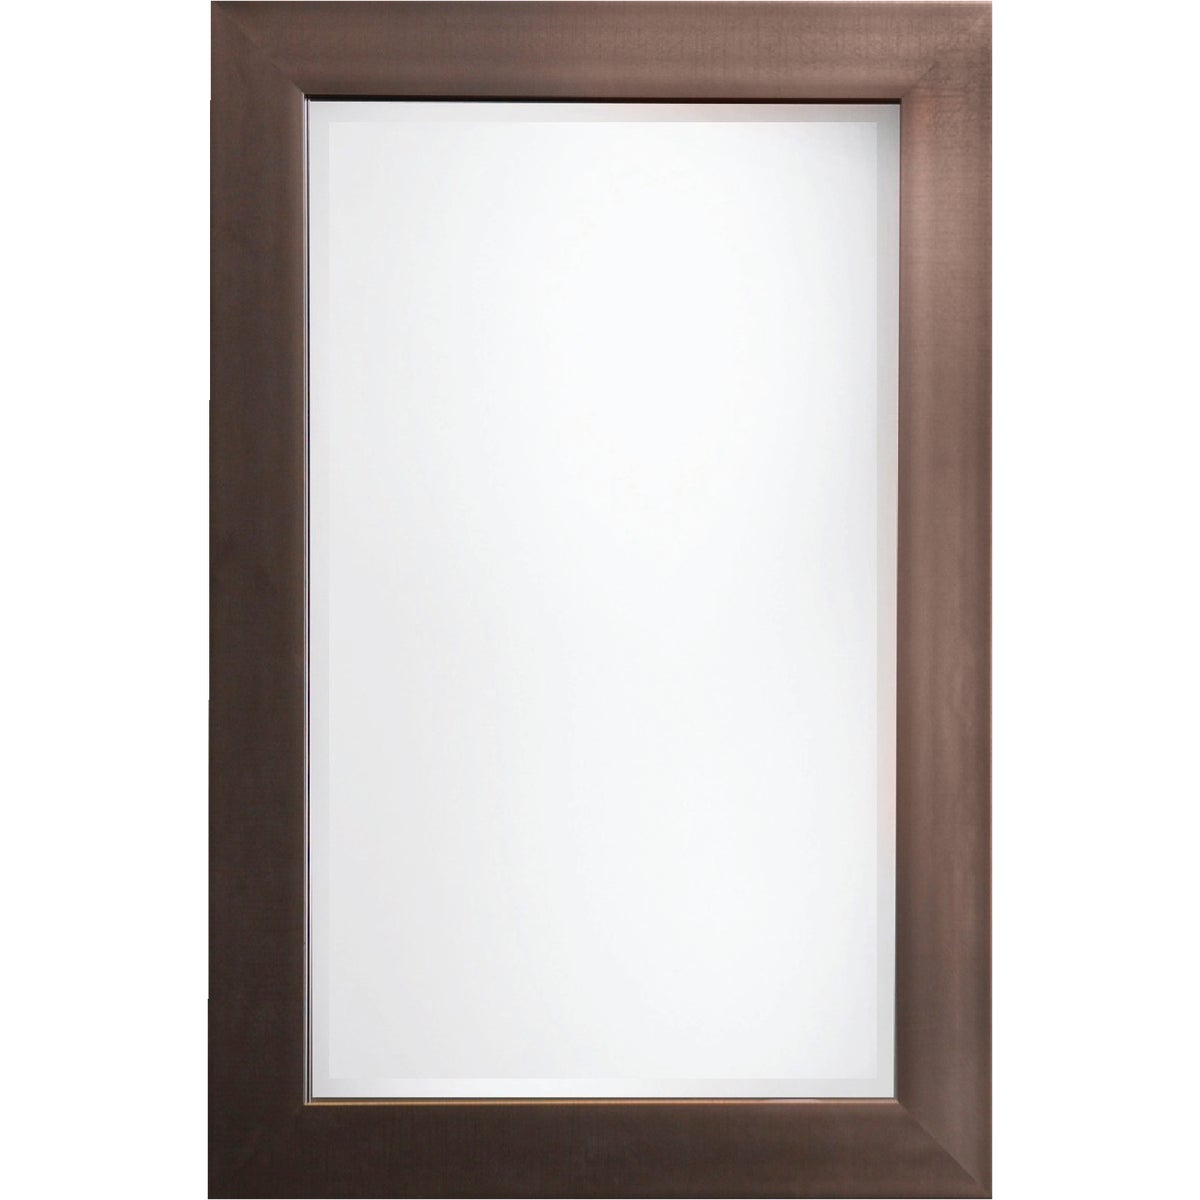 Item 279433, 24" x 36" Austin framed wall mirror with antique pewter finish and beveled 